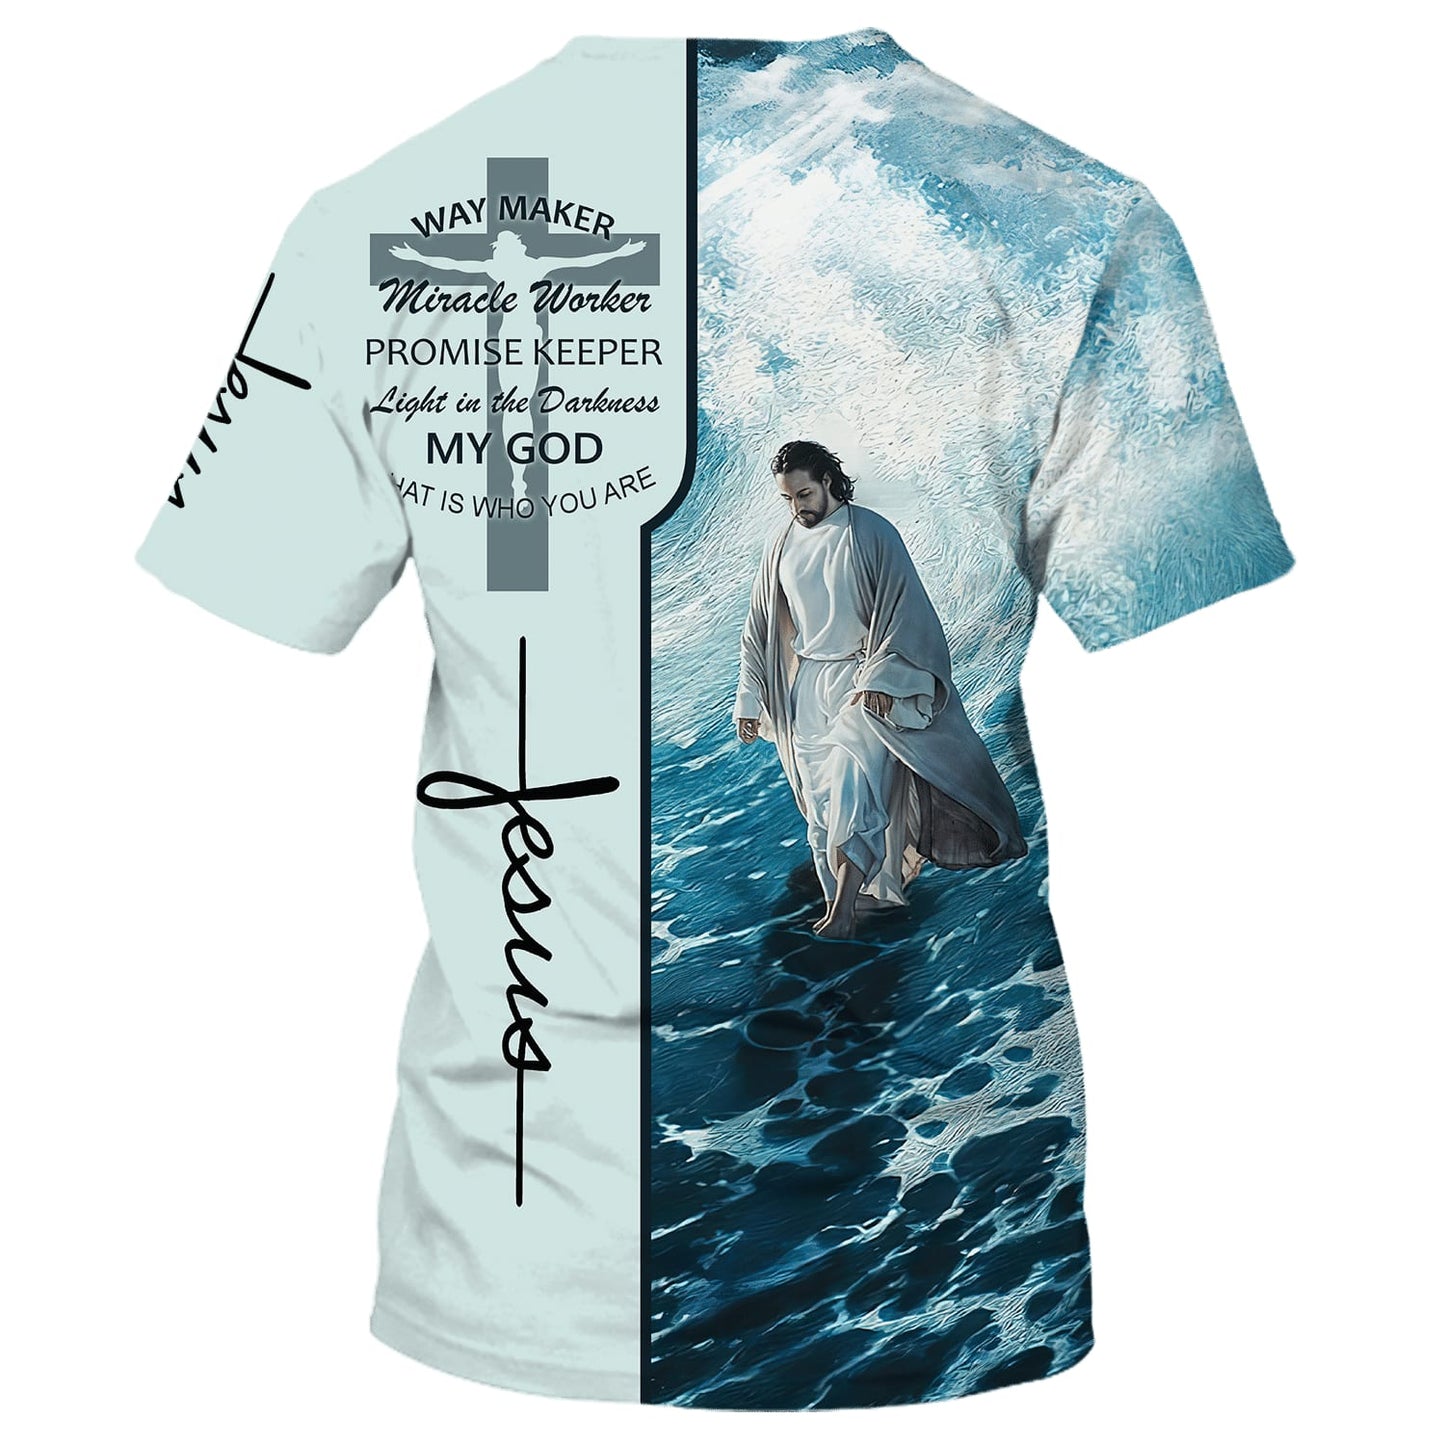 Jesus Walking On The Beach Shirts - Way Maker Miracle Worker 3d Shirts - Christian T Shirts For Men And Women